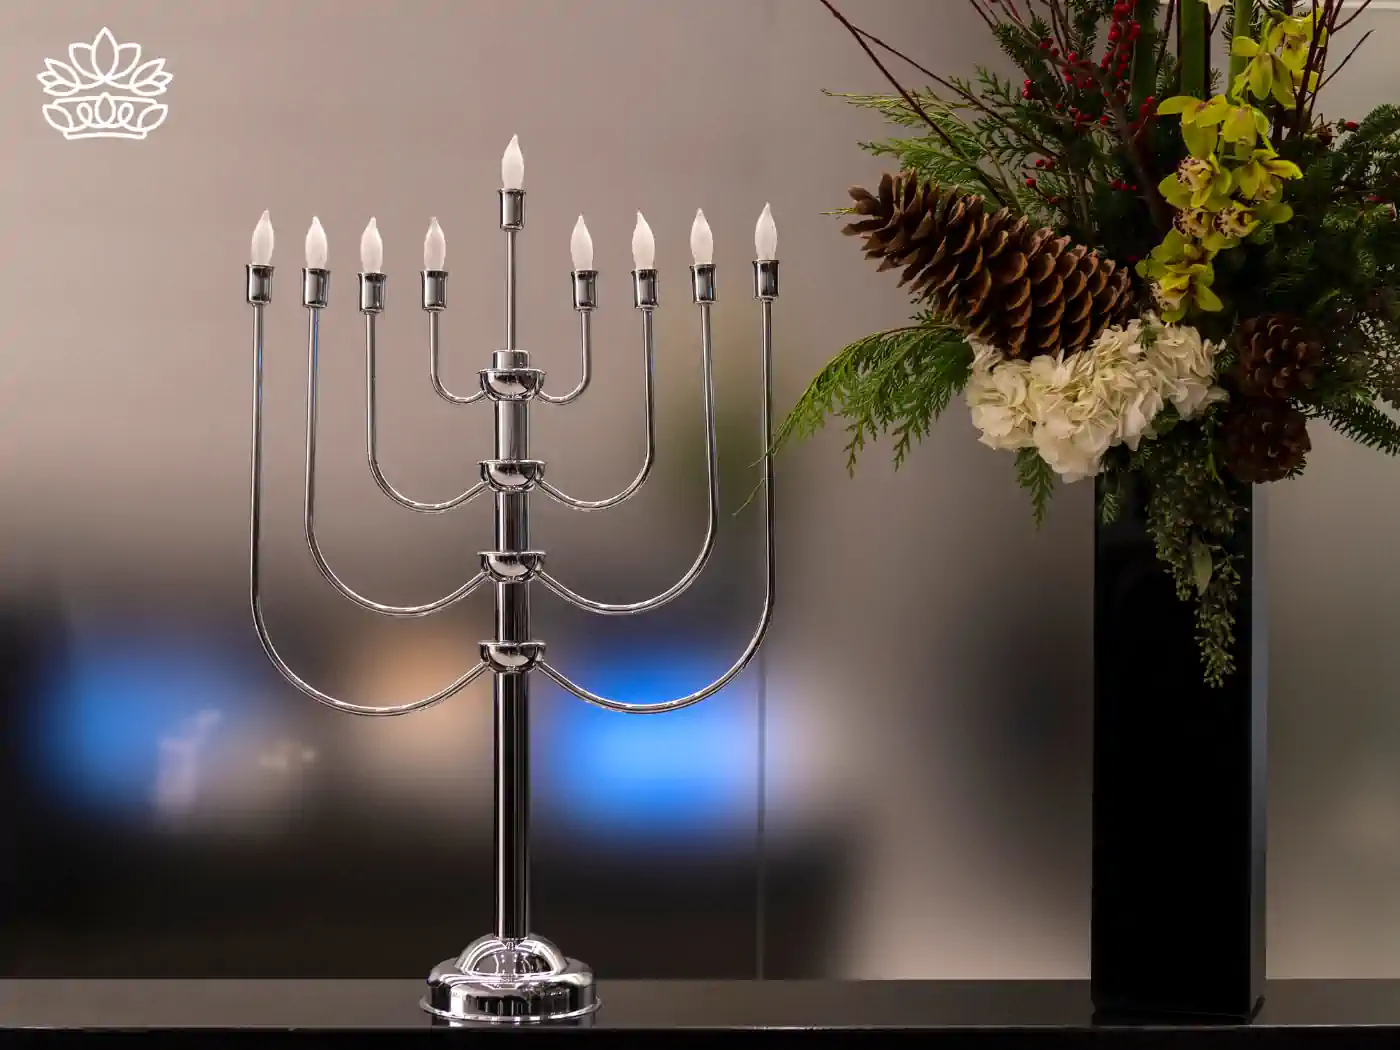 A modern silver menorah with all nine candles lit, placed next to a vase with a festive floral arrangement including pinecones and green foliage. Fabulous Flowers and Gifts - Hanukkah Flowers.